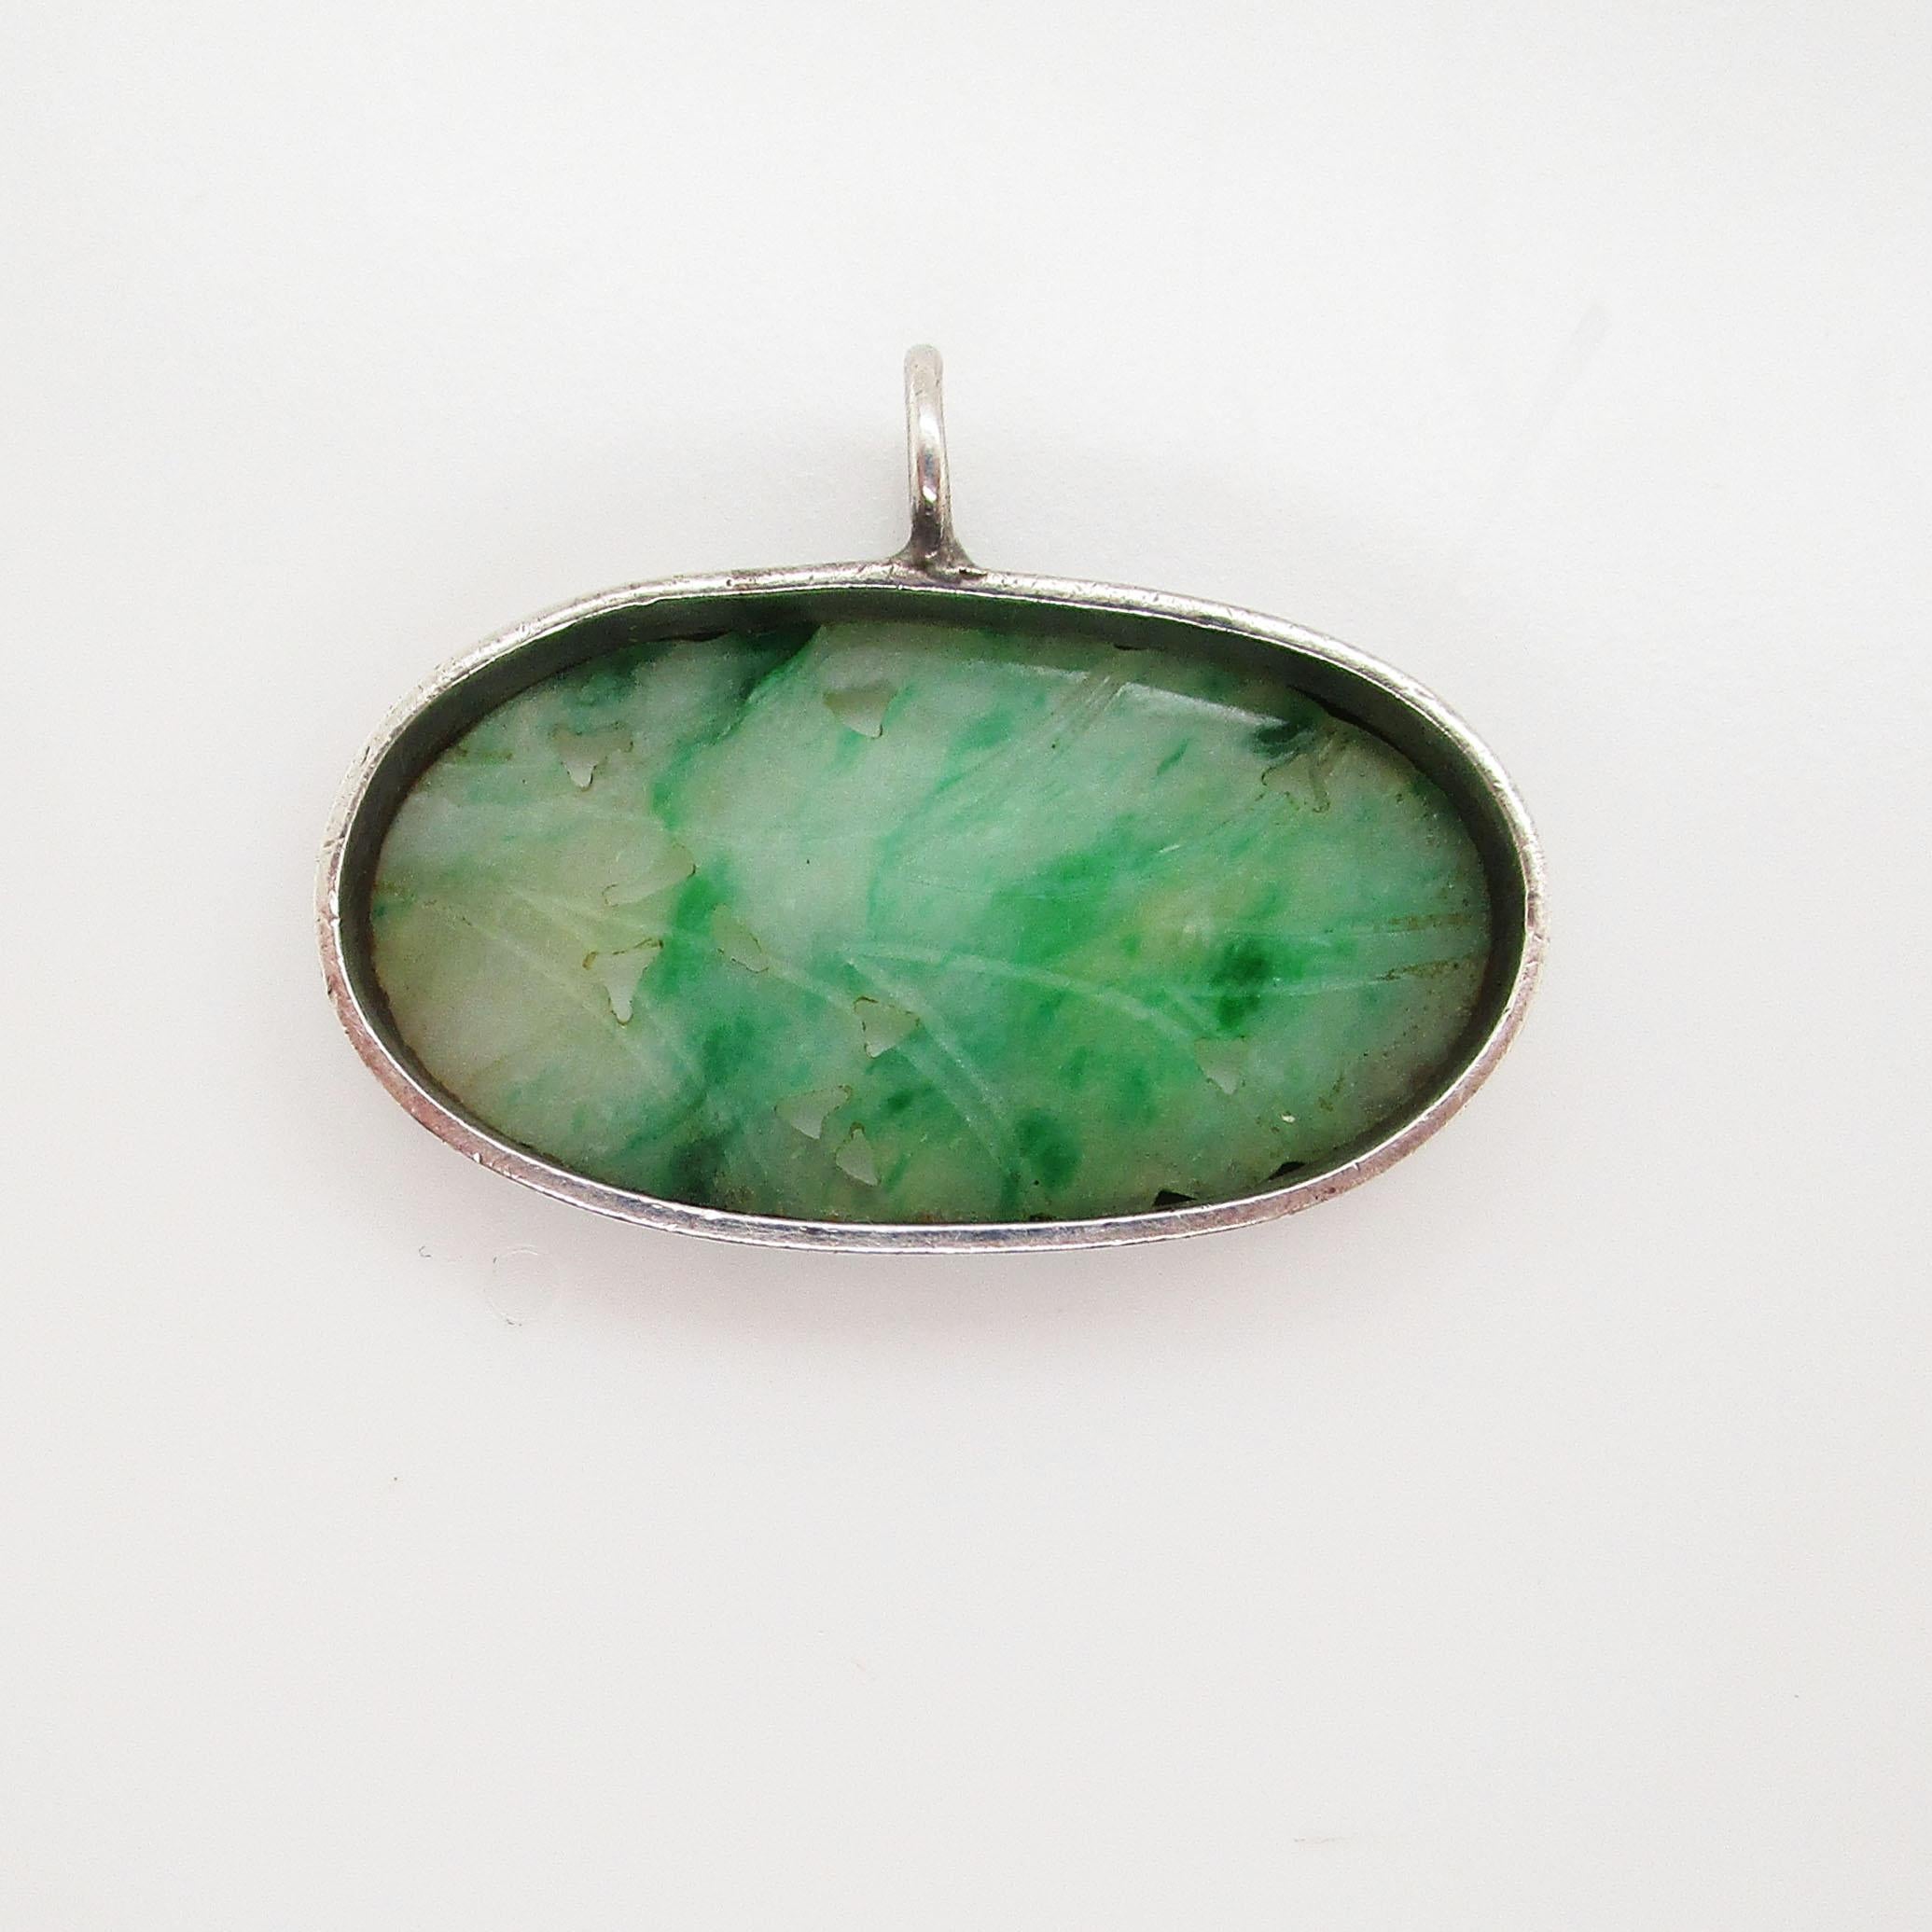 1925 Art Deco Carved Jade Sterling Silver Pendant In Excellent Condition For Sale In Lexington, KY